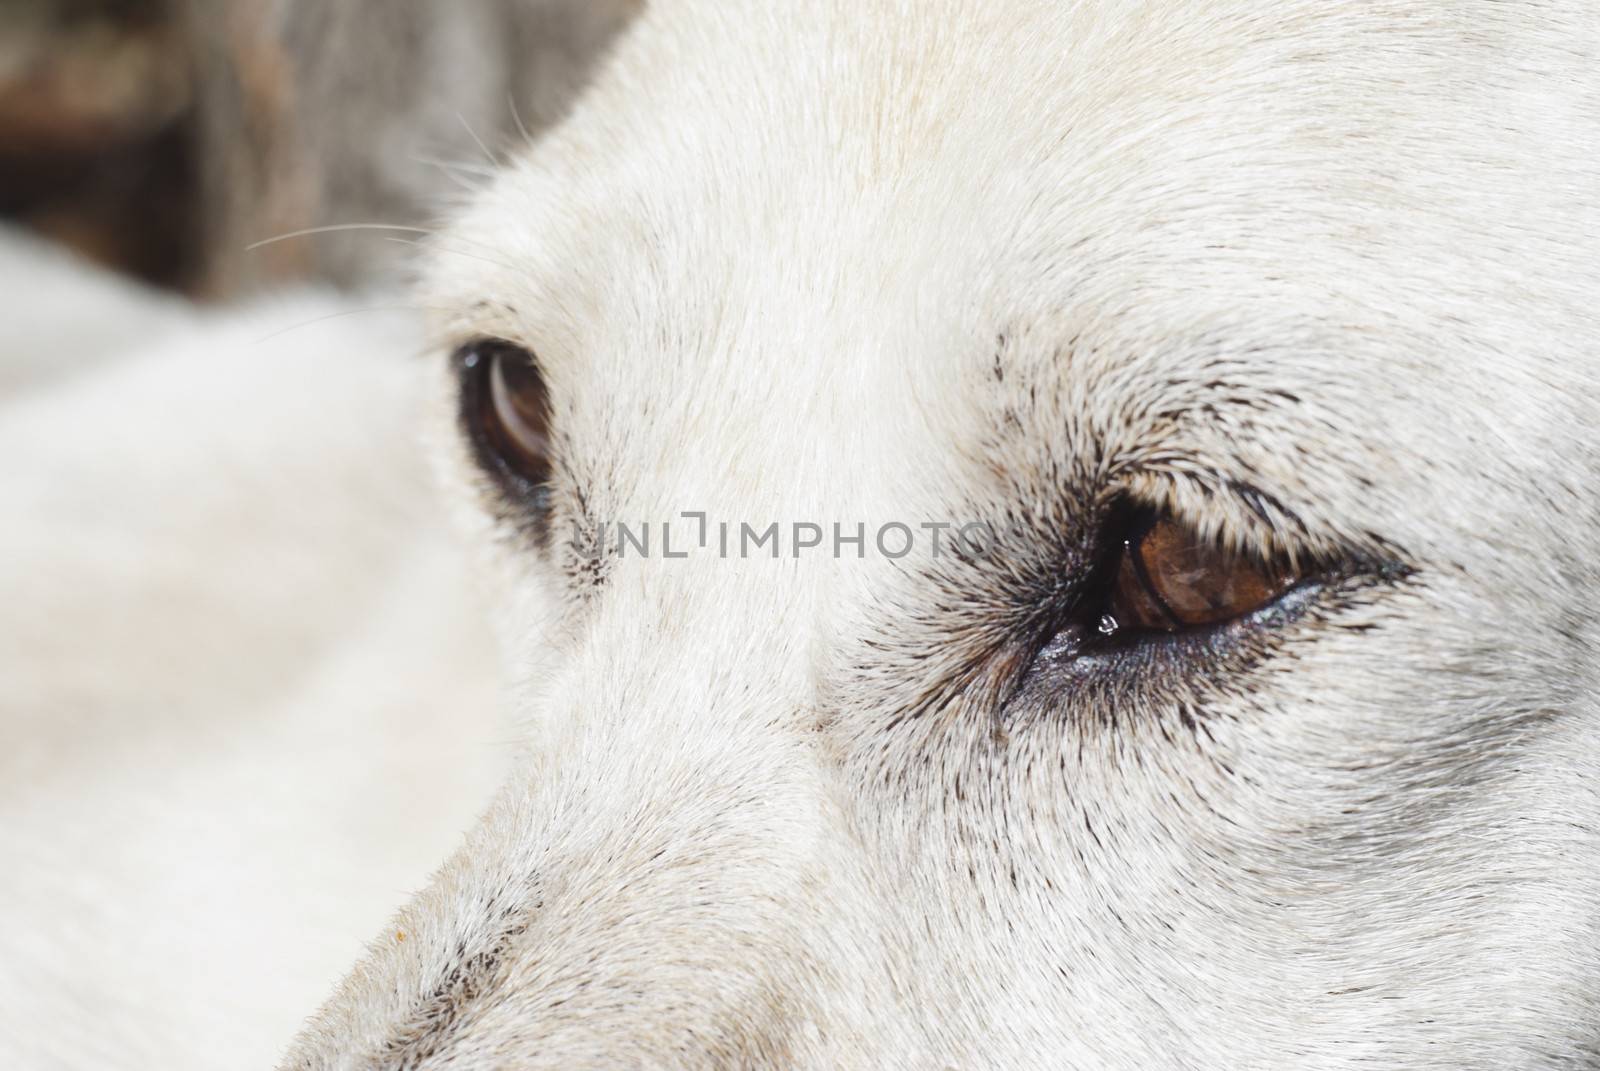 Close-up of the eye of a white dog